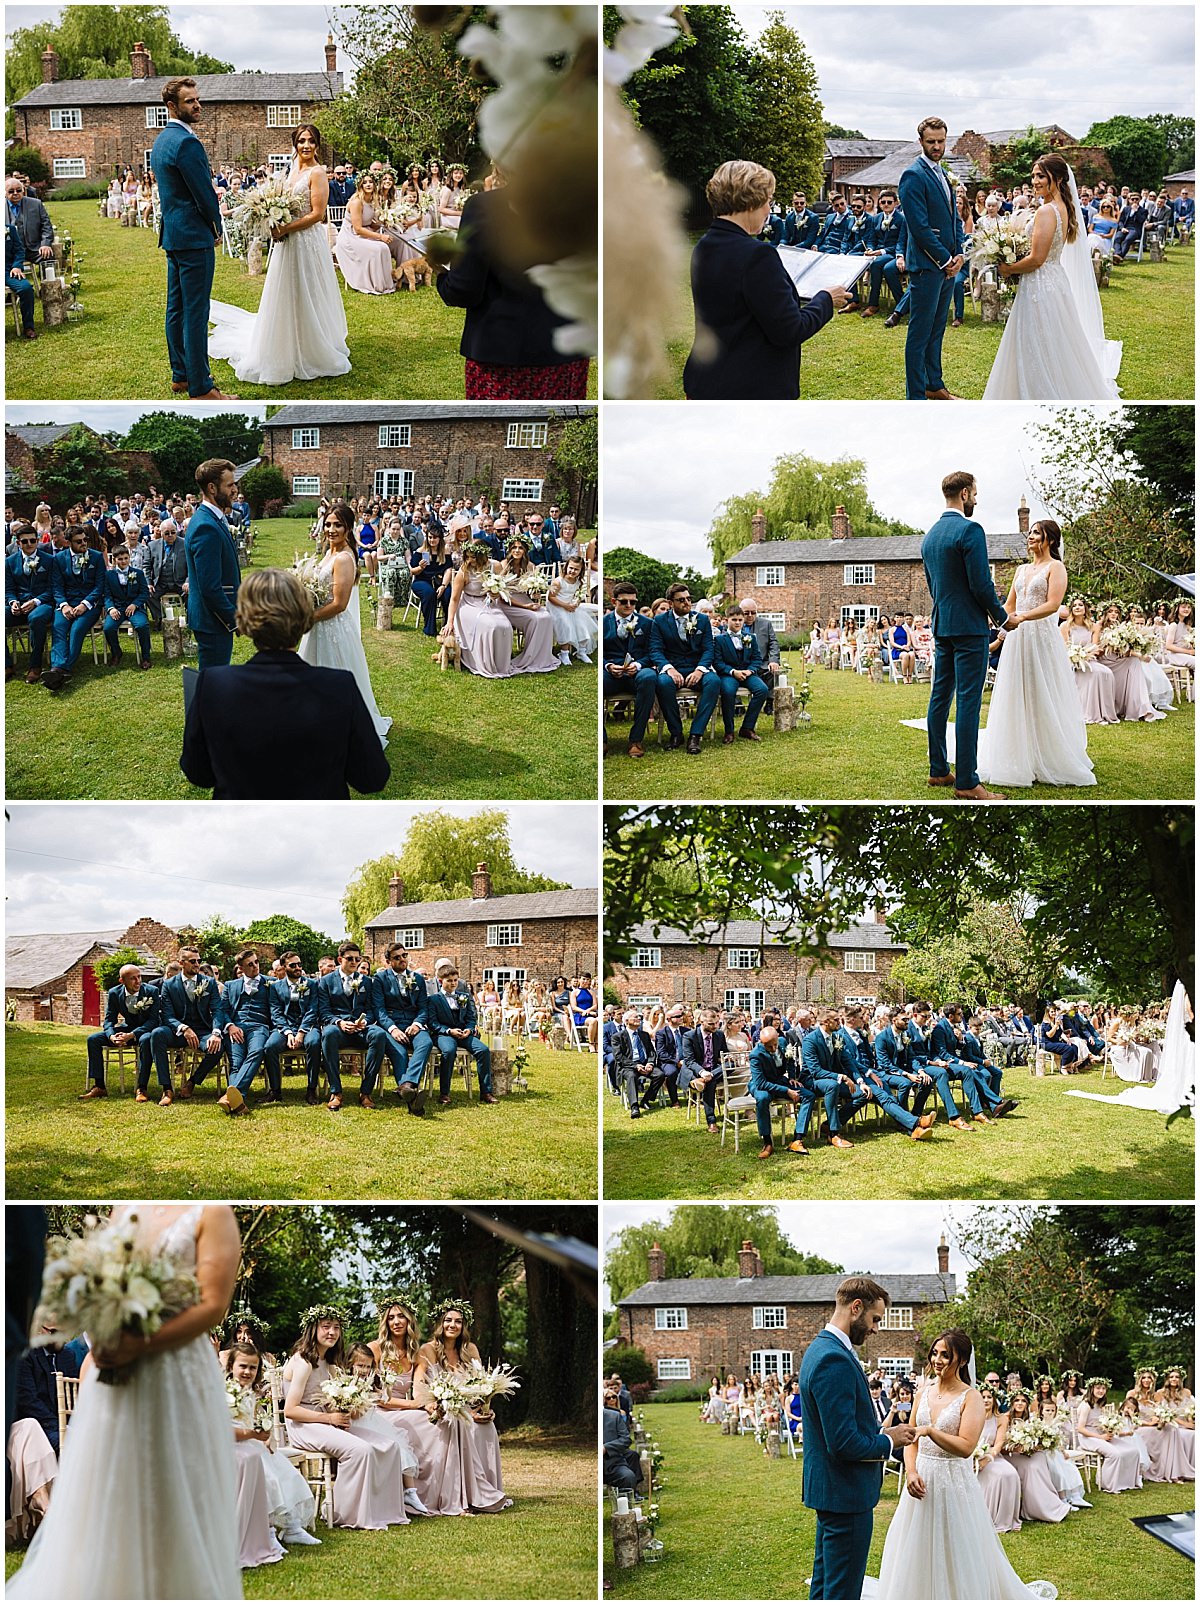 Beautiful summer outdoor ceremony at stock farm